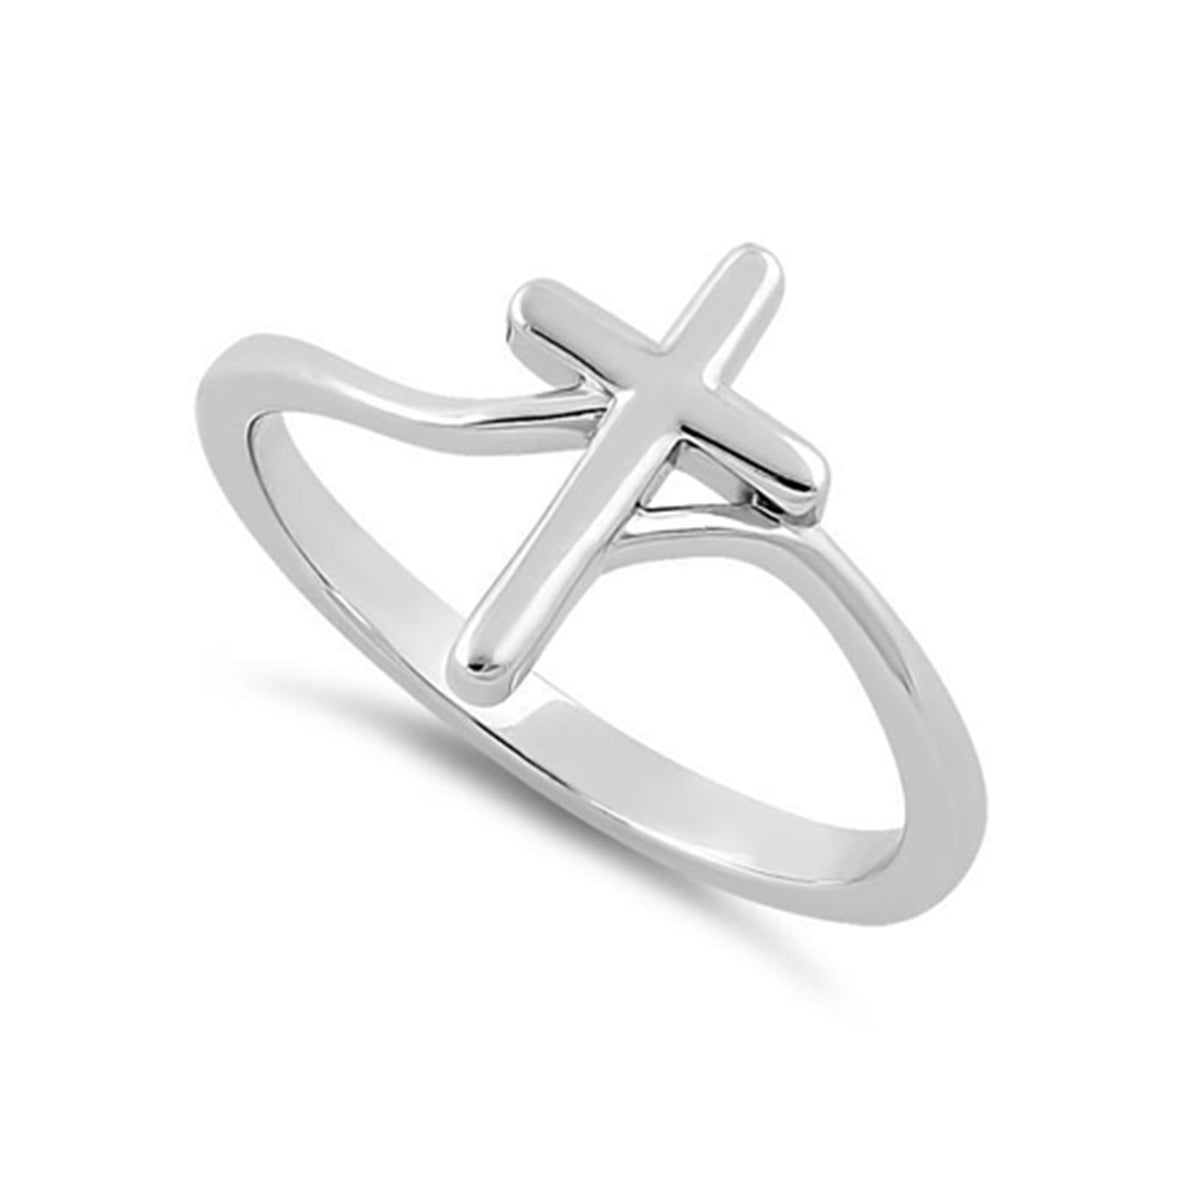 Flame Cross Spinner Ring | Bible verse jewelry, Spinner rings, Faith jewelry